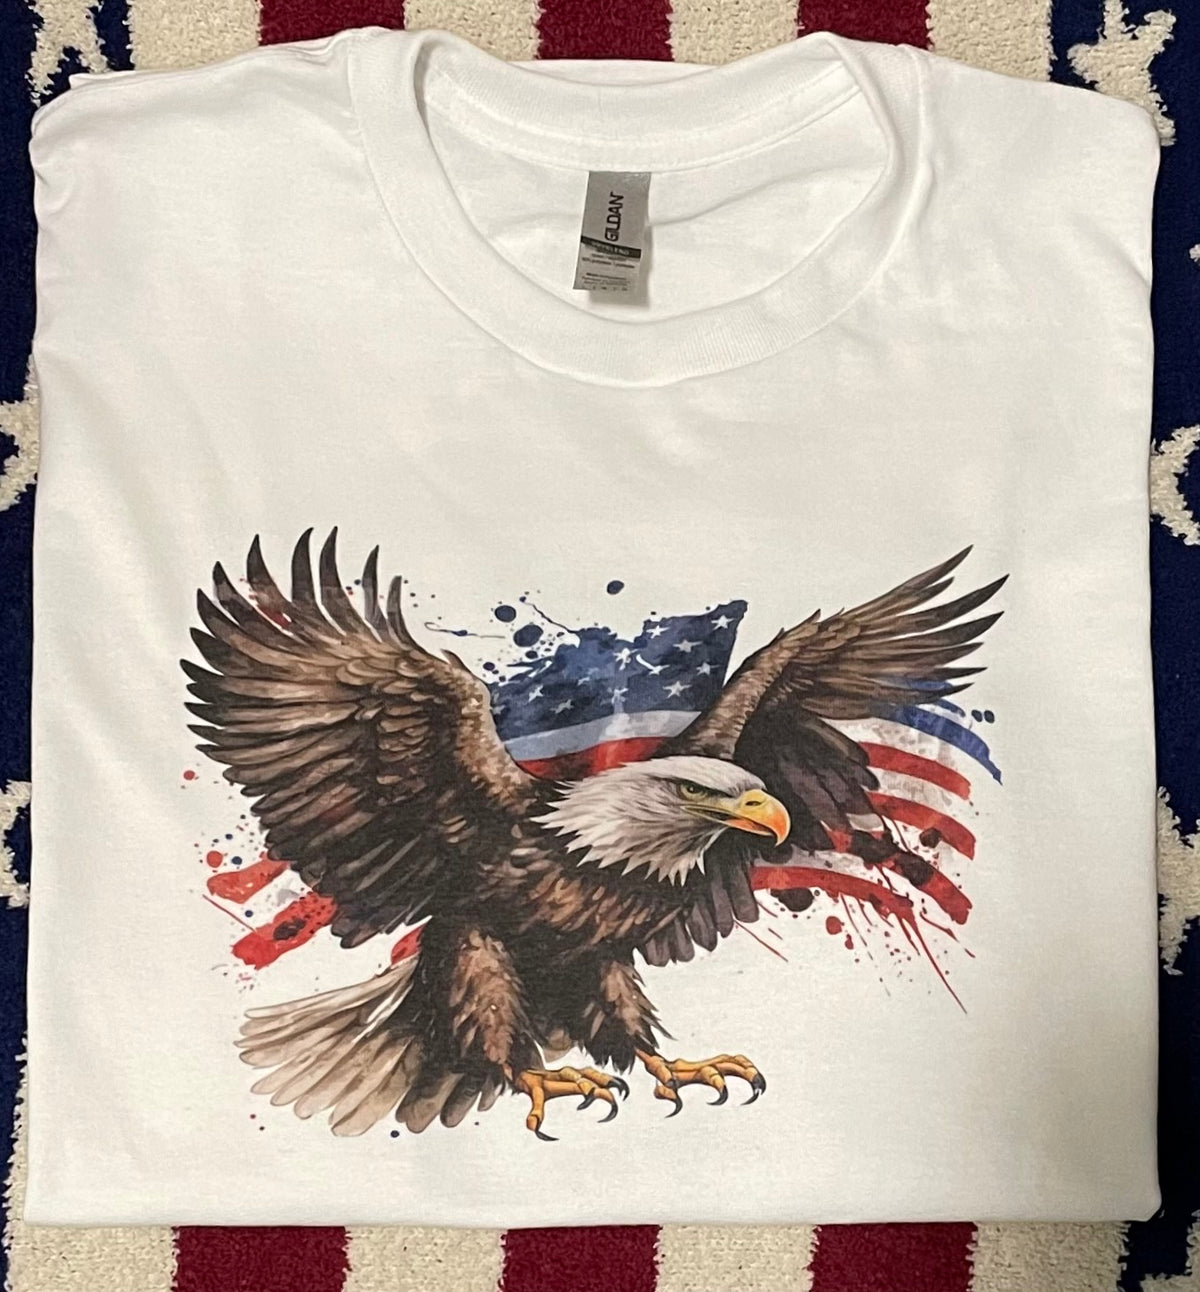 American Eagle Graphic Tee